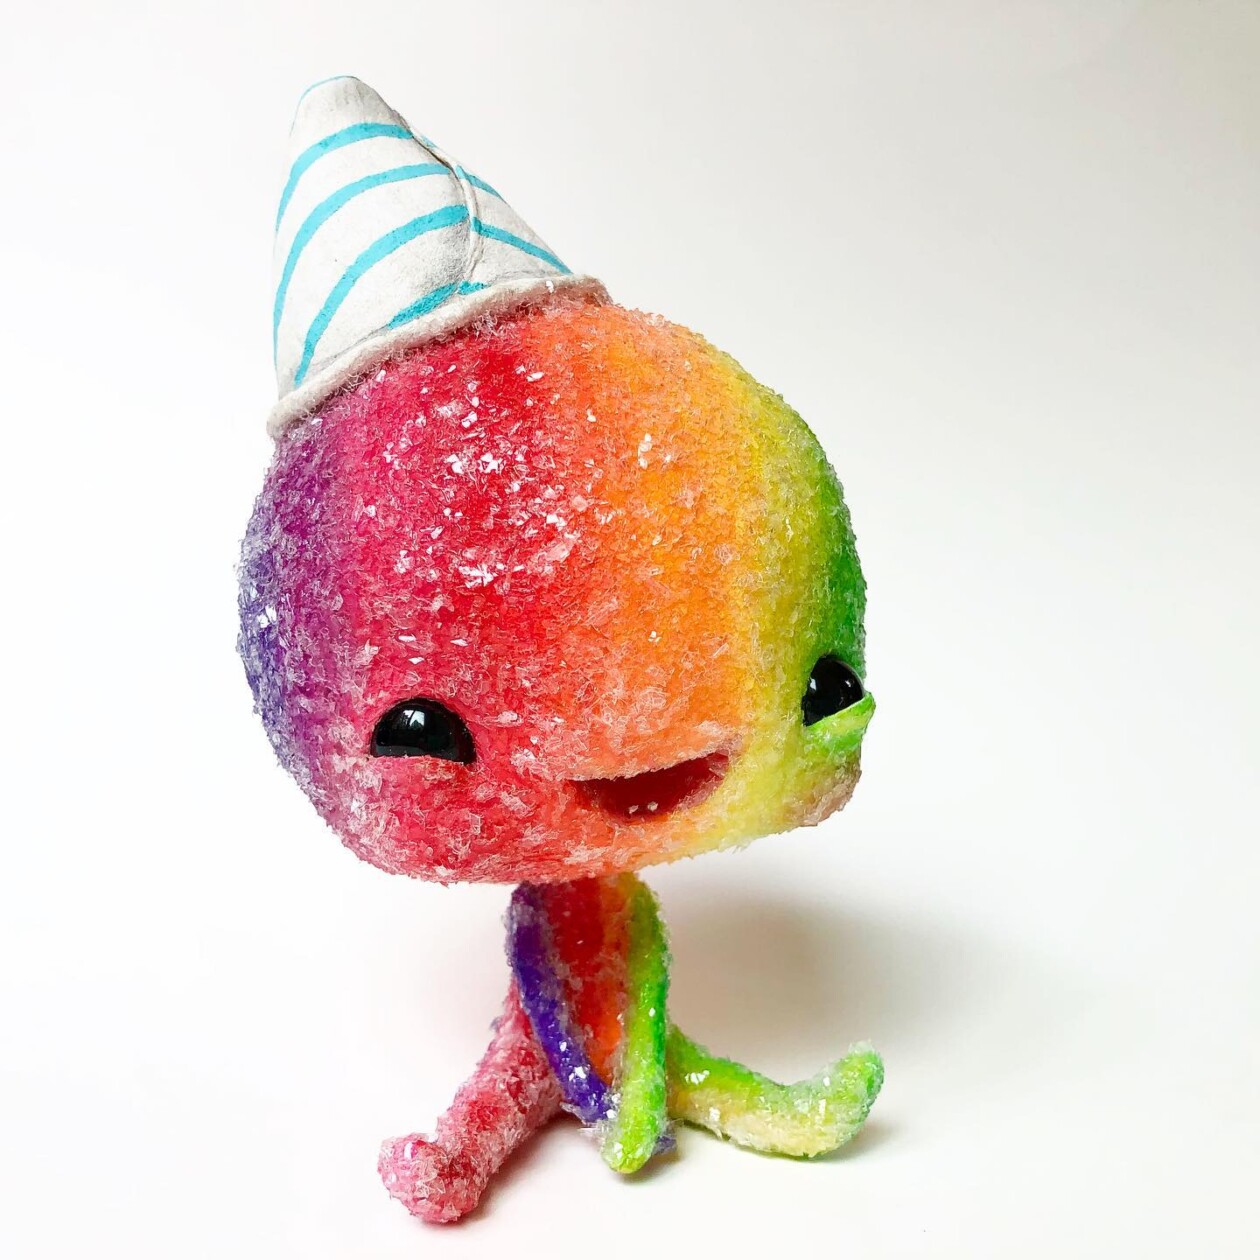 Cute And Creepy Little Monster Toys By Sara Duarte (8)